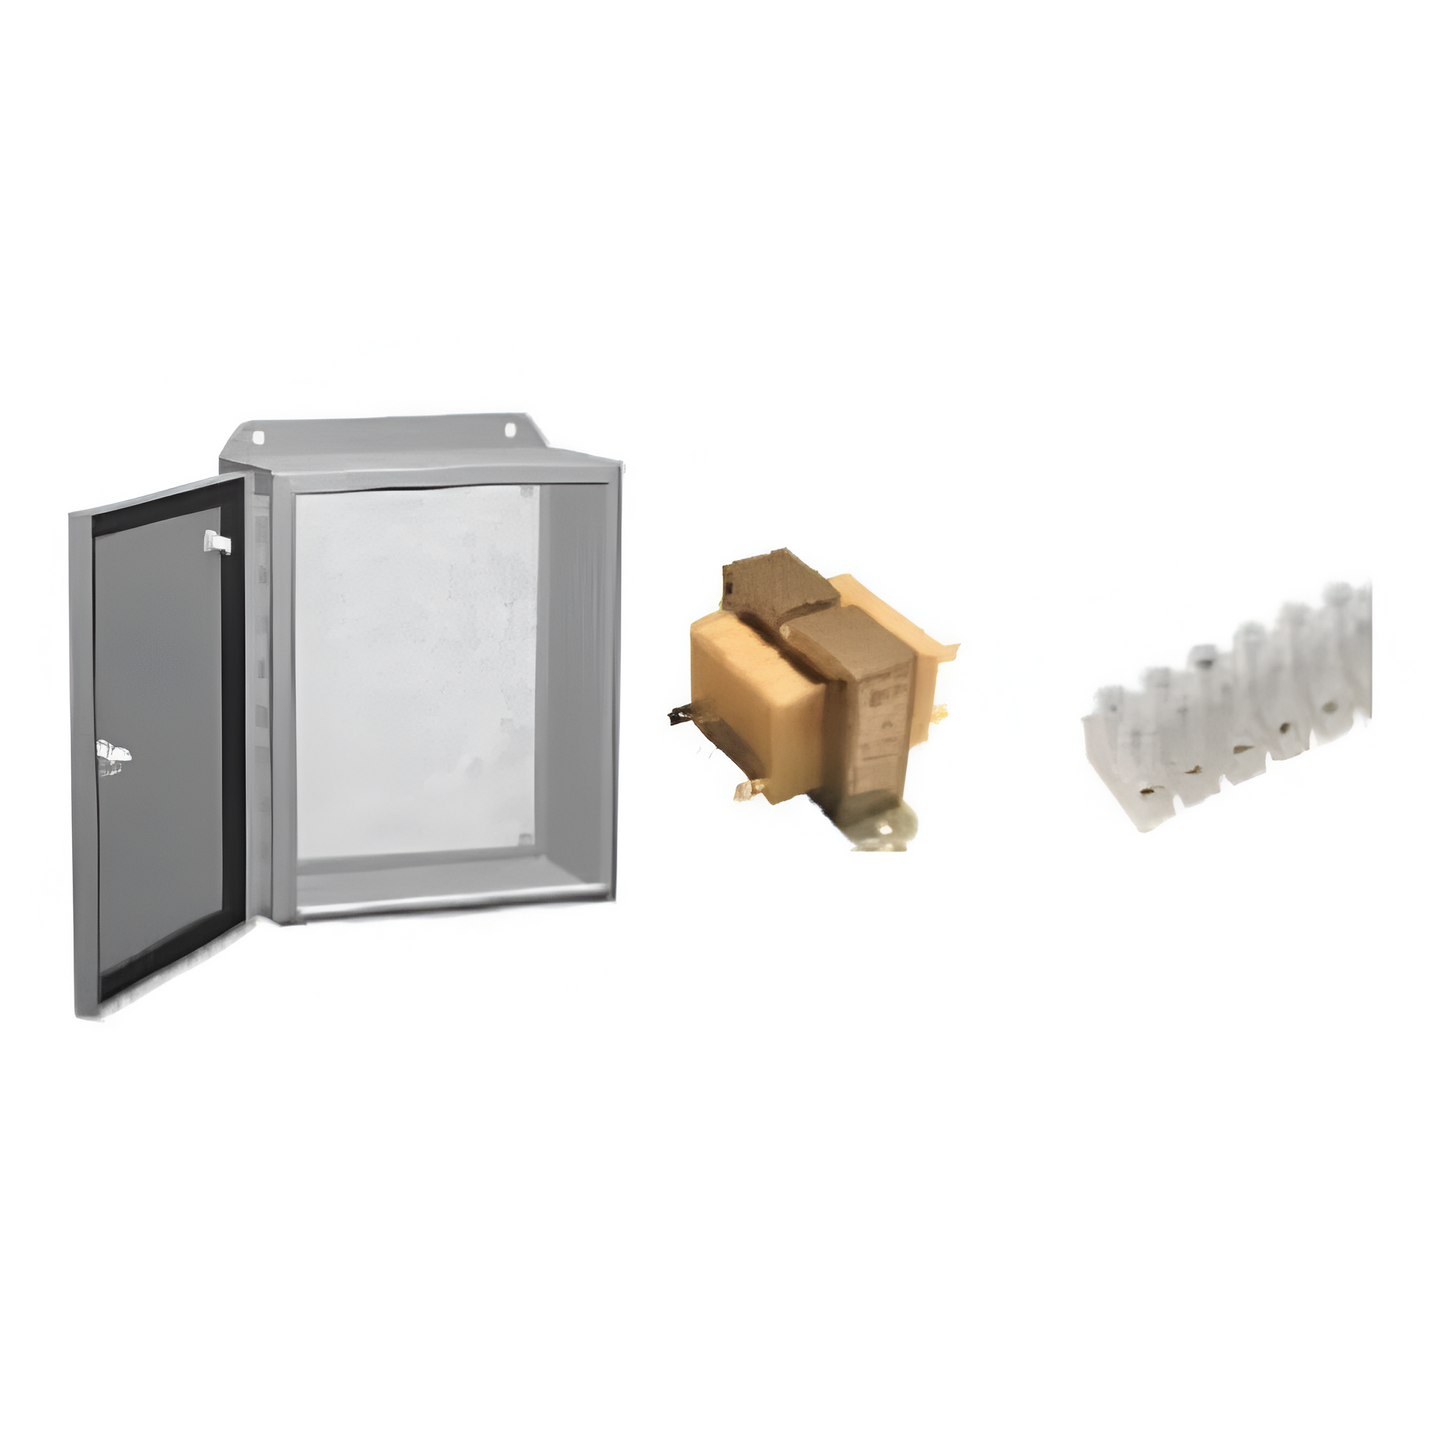 Control Panel Enclosure Kit - NEMA 4 RATED - For Schwank Electric Heaters